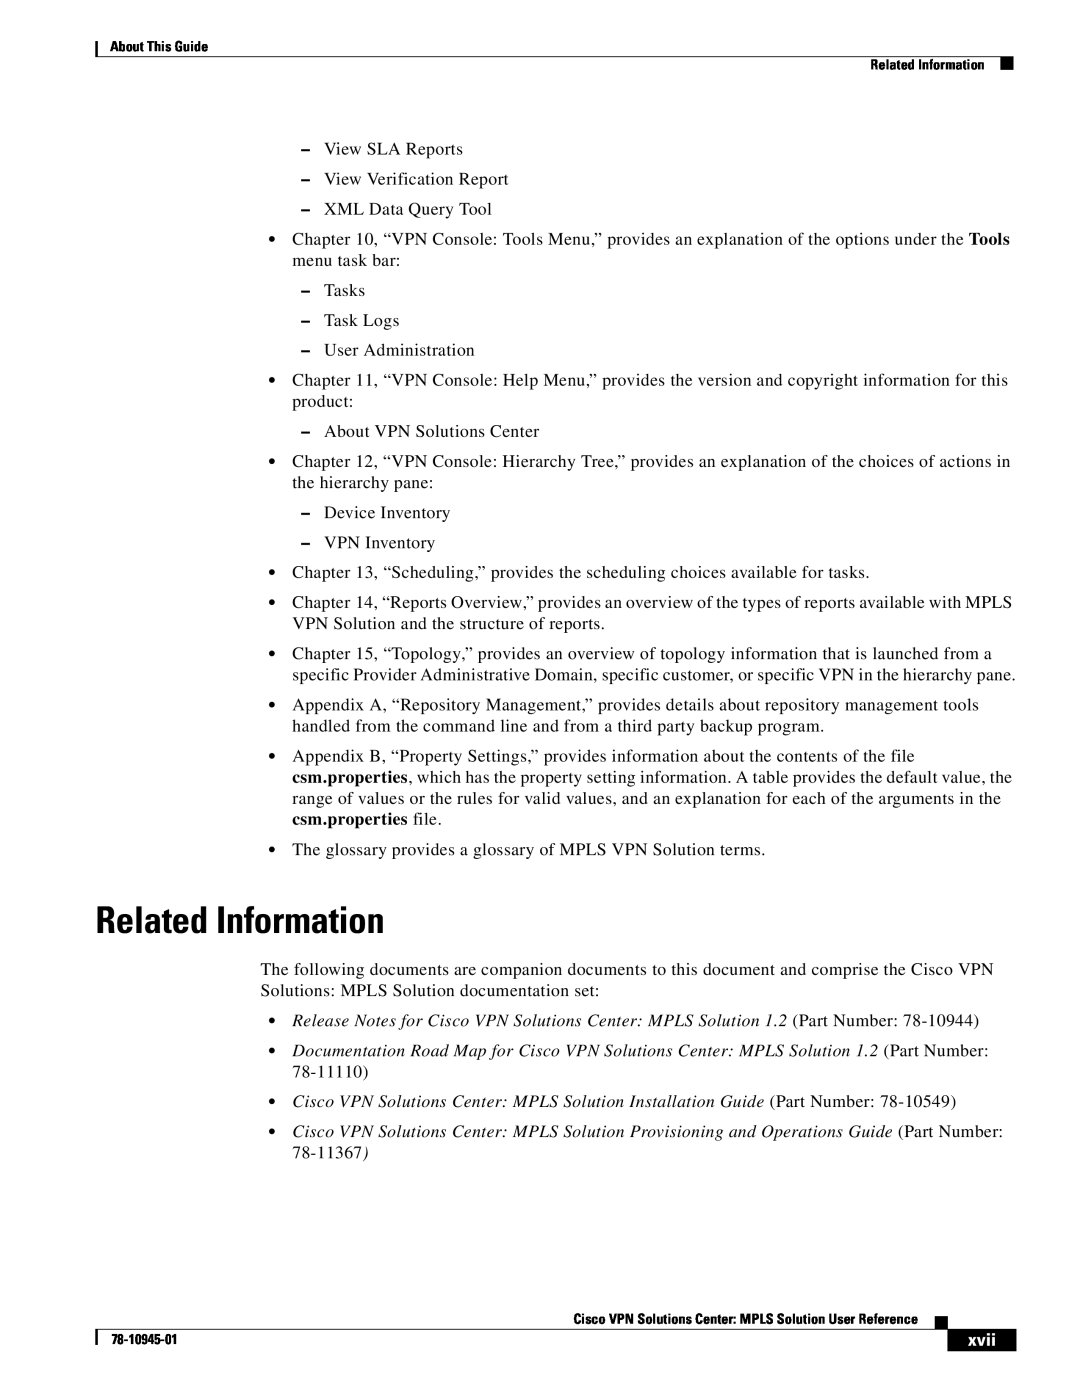 Cisco Systems 78-10945-01 manual Related Information, xvii 